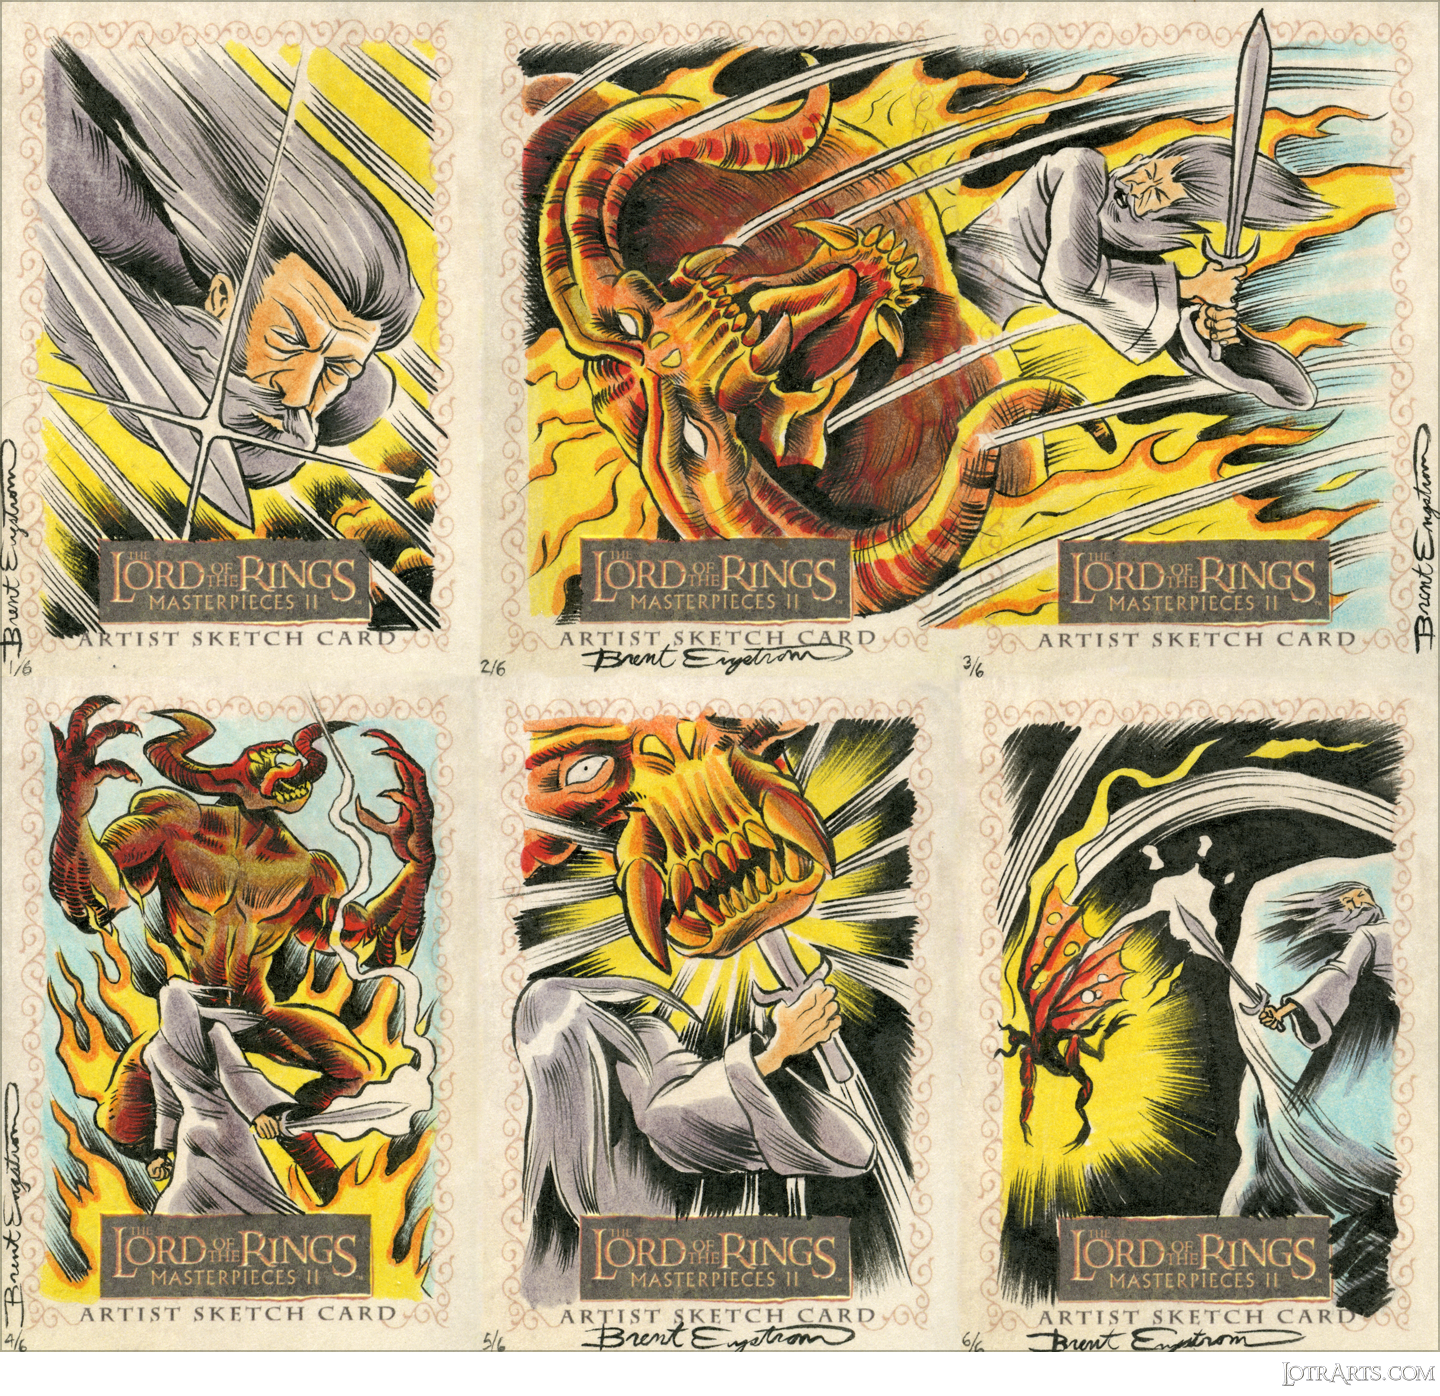 Battle of the Balrog and Gandalf, six-card sequenced scene panel, by Engstrom: artist return sketches<span class="ngViews">23 views</span>